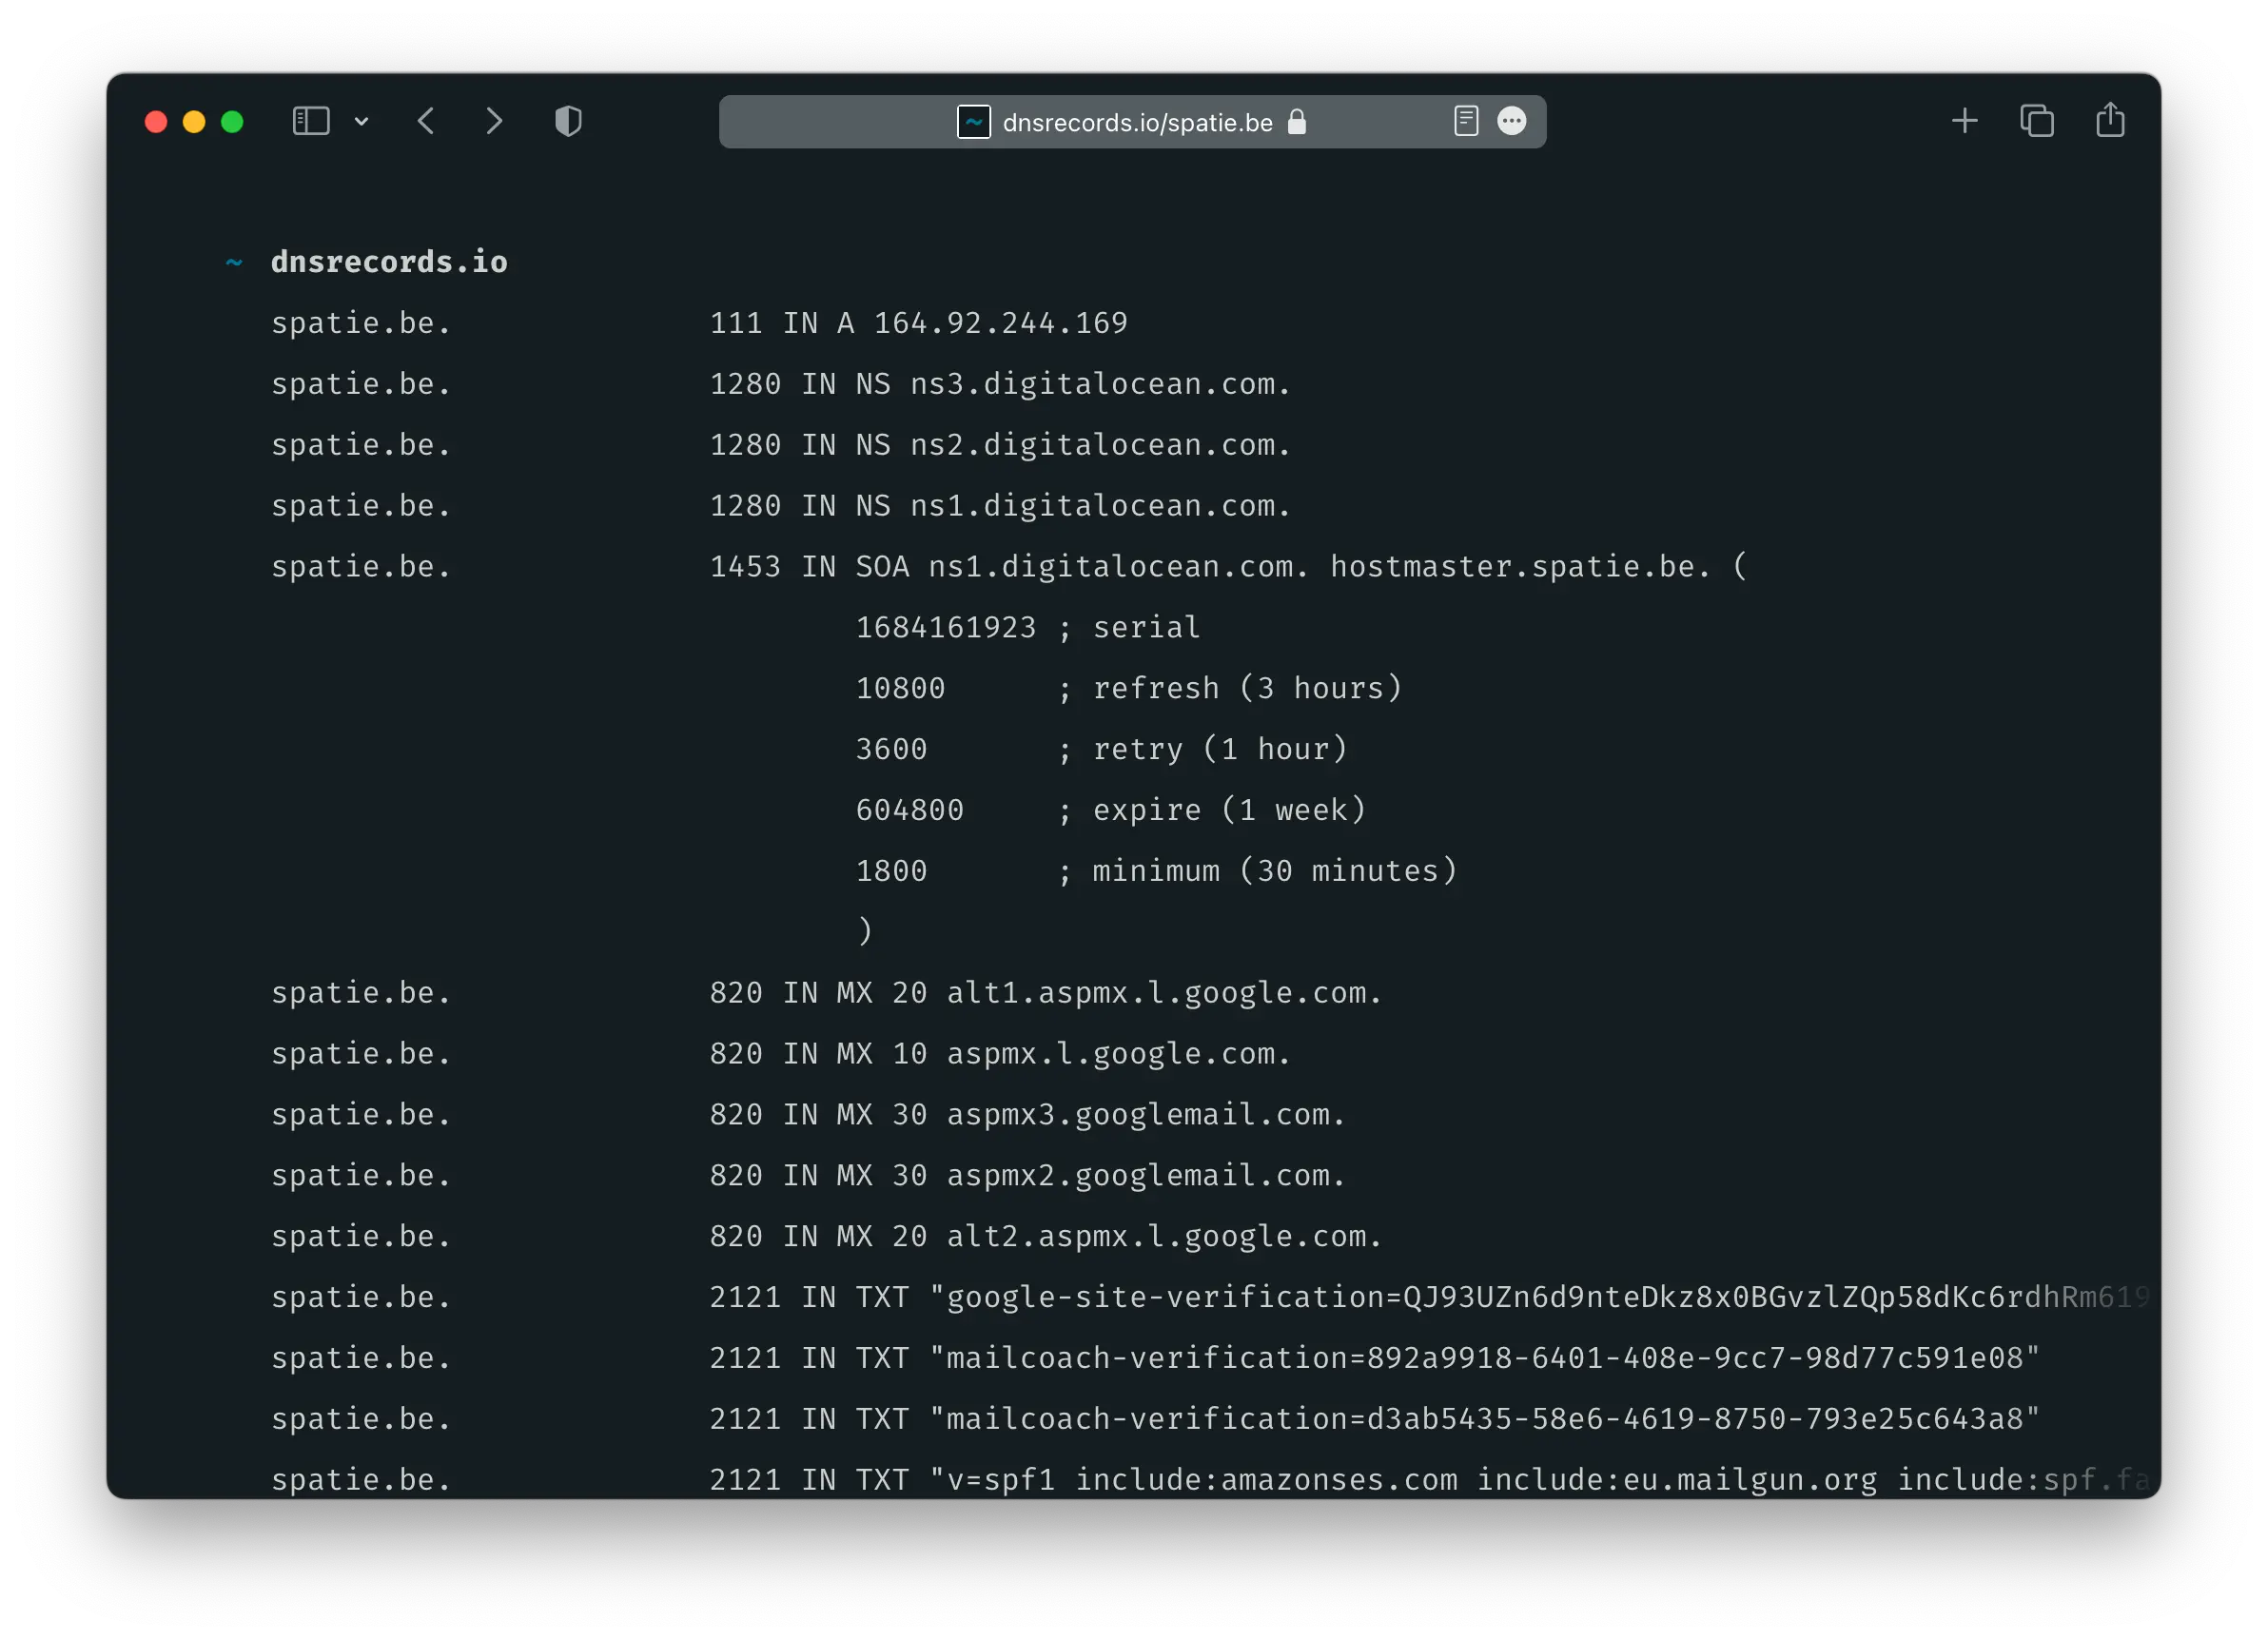 Screenshot of dnsrecords.io with spatie.be DNS records